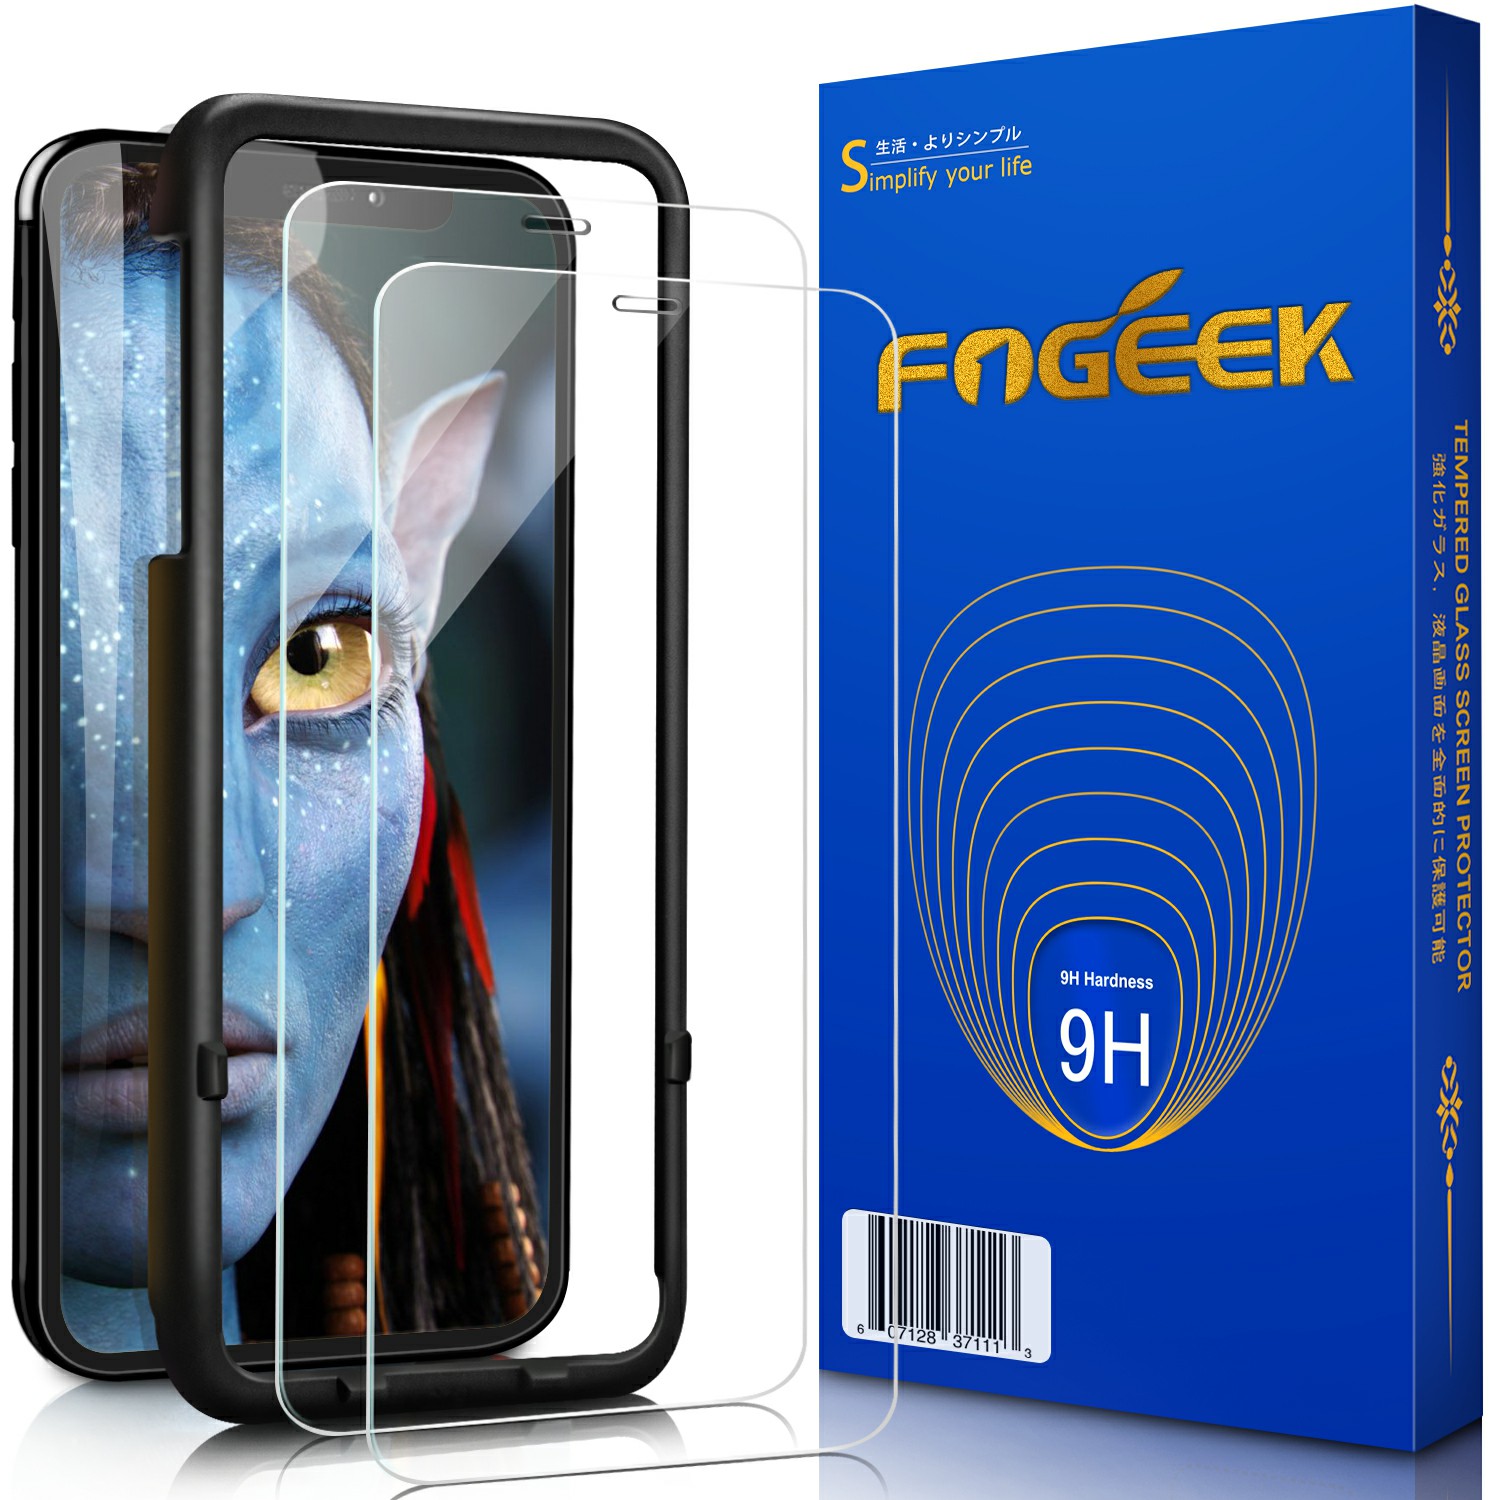 FOGEEK iPhone XS MAX Screen Protector, 0.33mm 9H Tempered Glass for iPhone Xs Max, Anti-Fingerprint & Scratch Resistant，UPC 607128371113